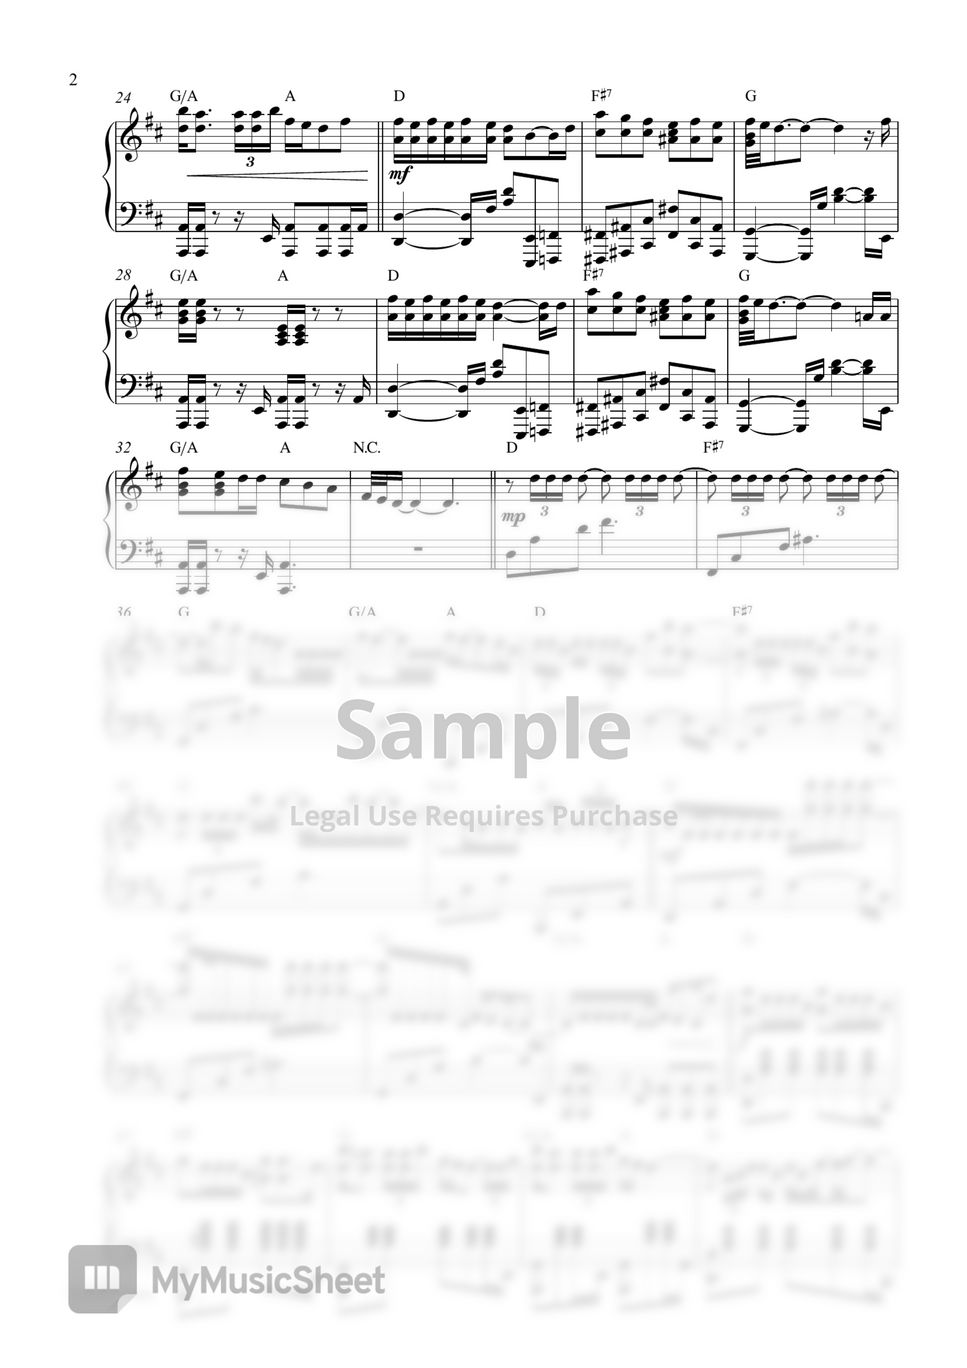 BTS - For Youth (Piano Sheet) by Pianella Piano